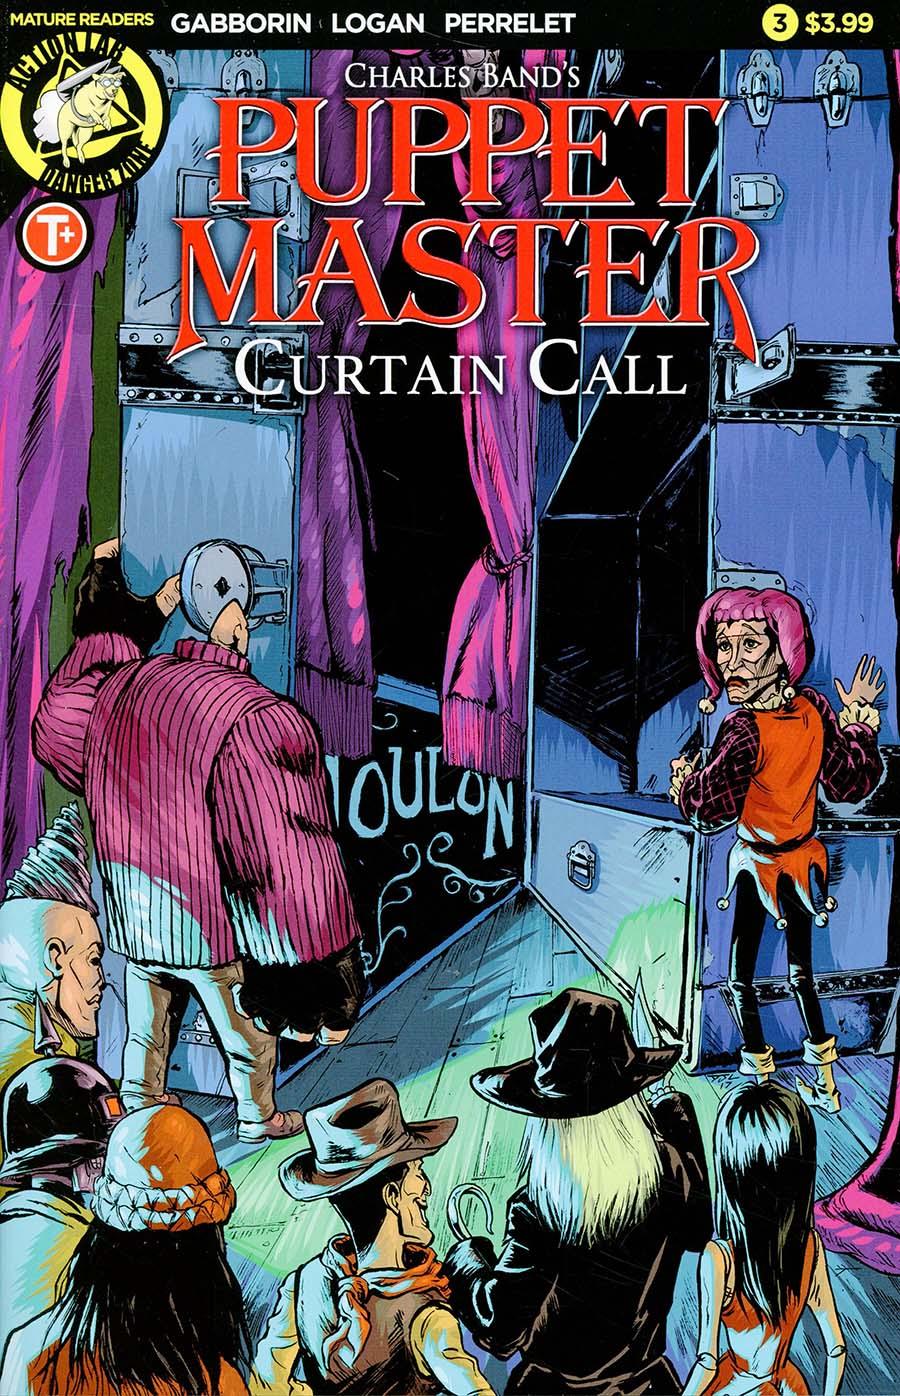 Puppet Master Curtain Call Vol. 1 #3